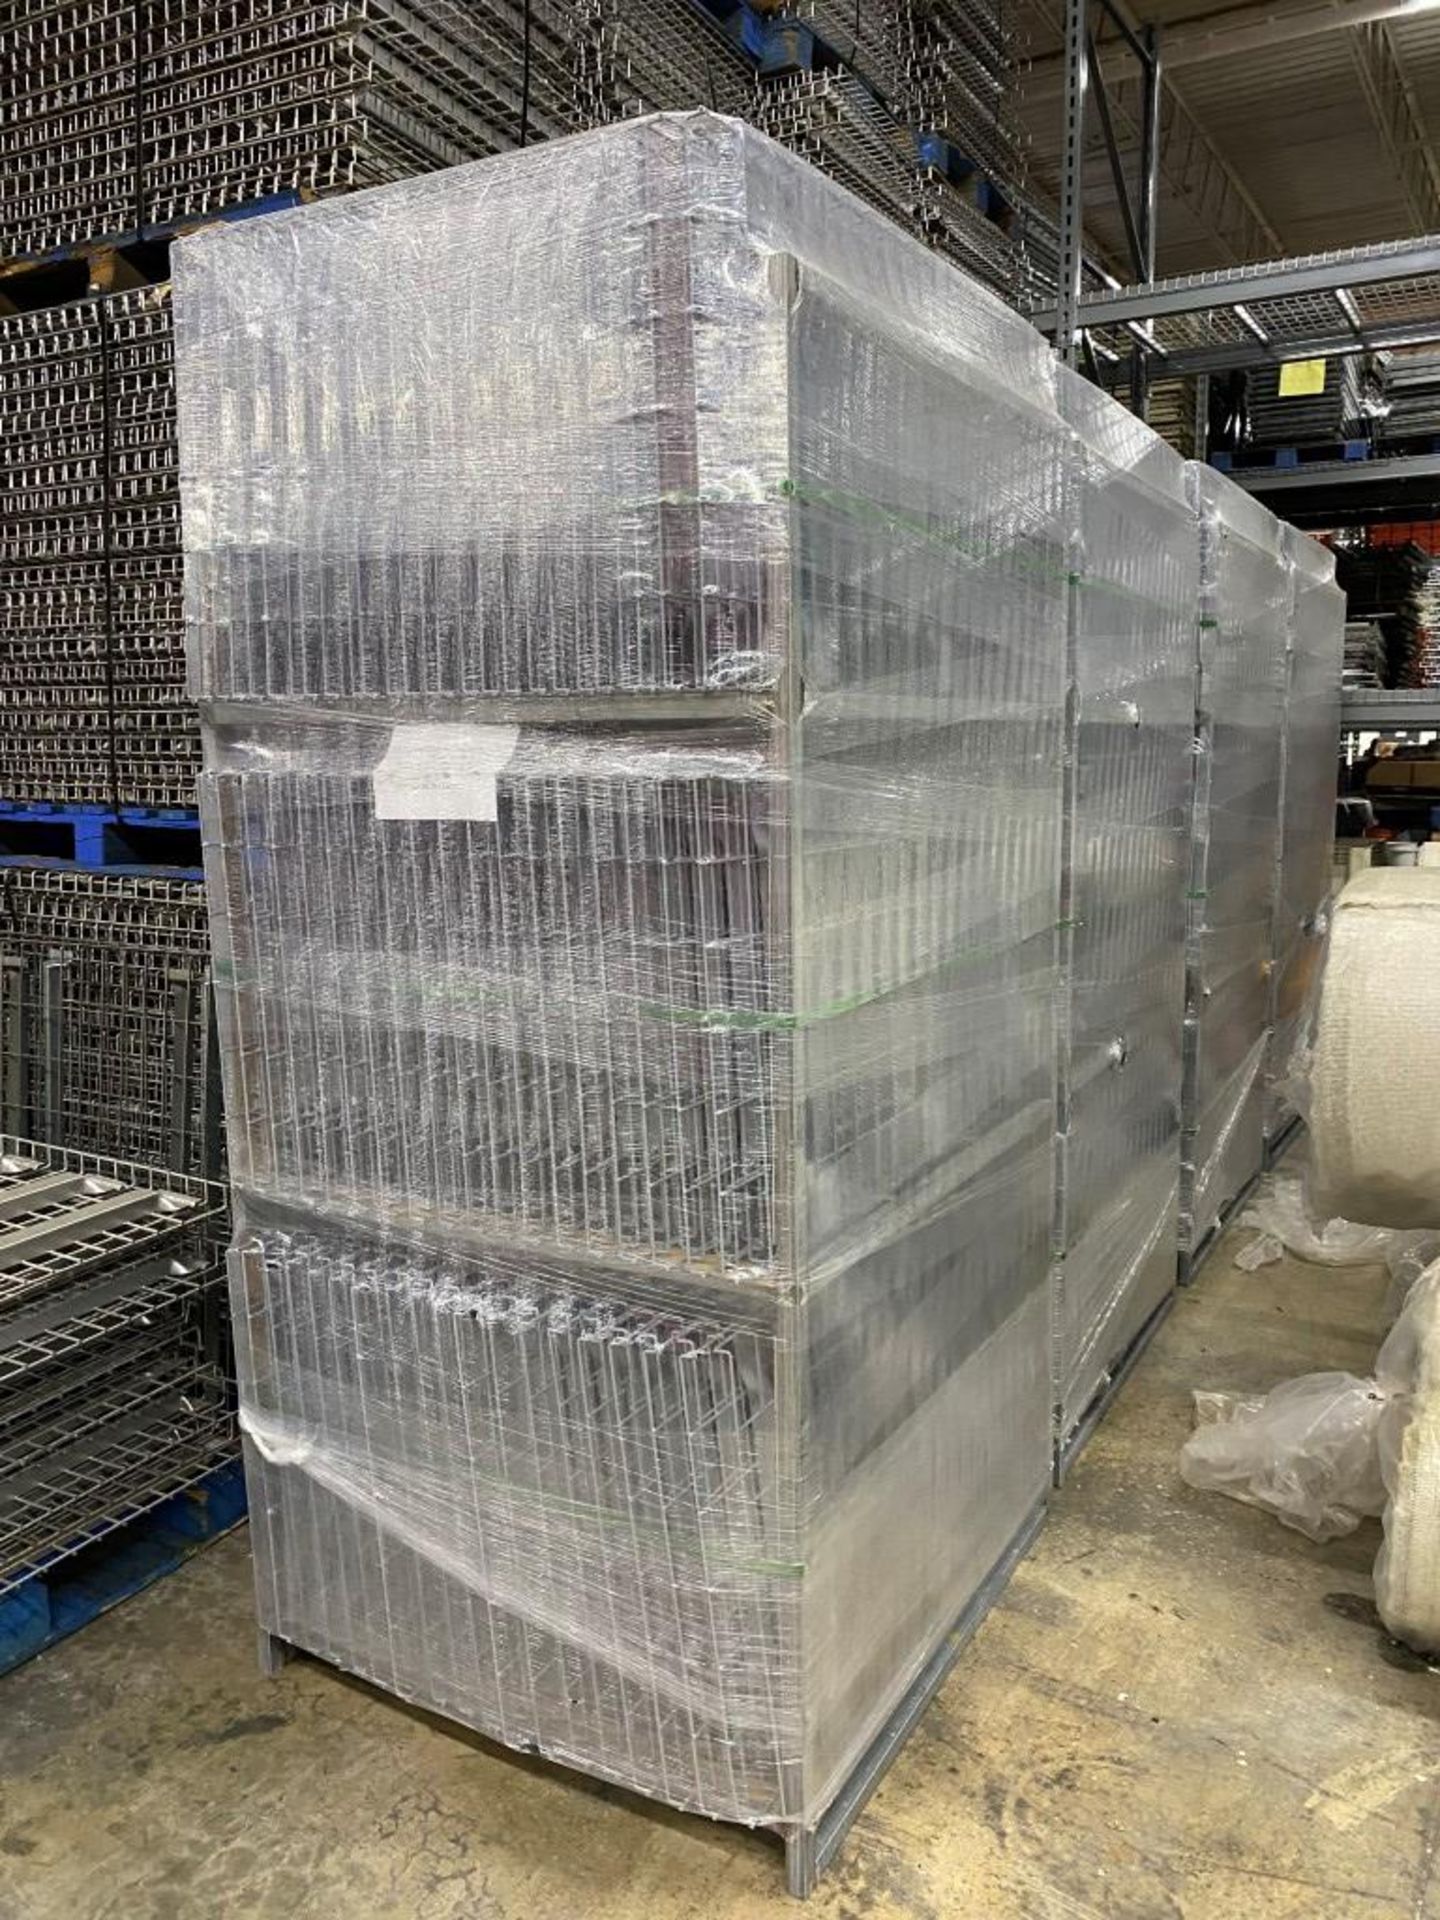 One Lot of Teardrop style Pallet Racks - 9 bays x 3lines x 8'H x 24"D x 96"W with 3 beam levels. - Image 4 of 4